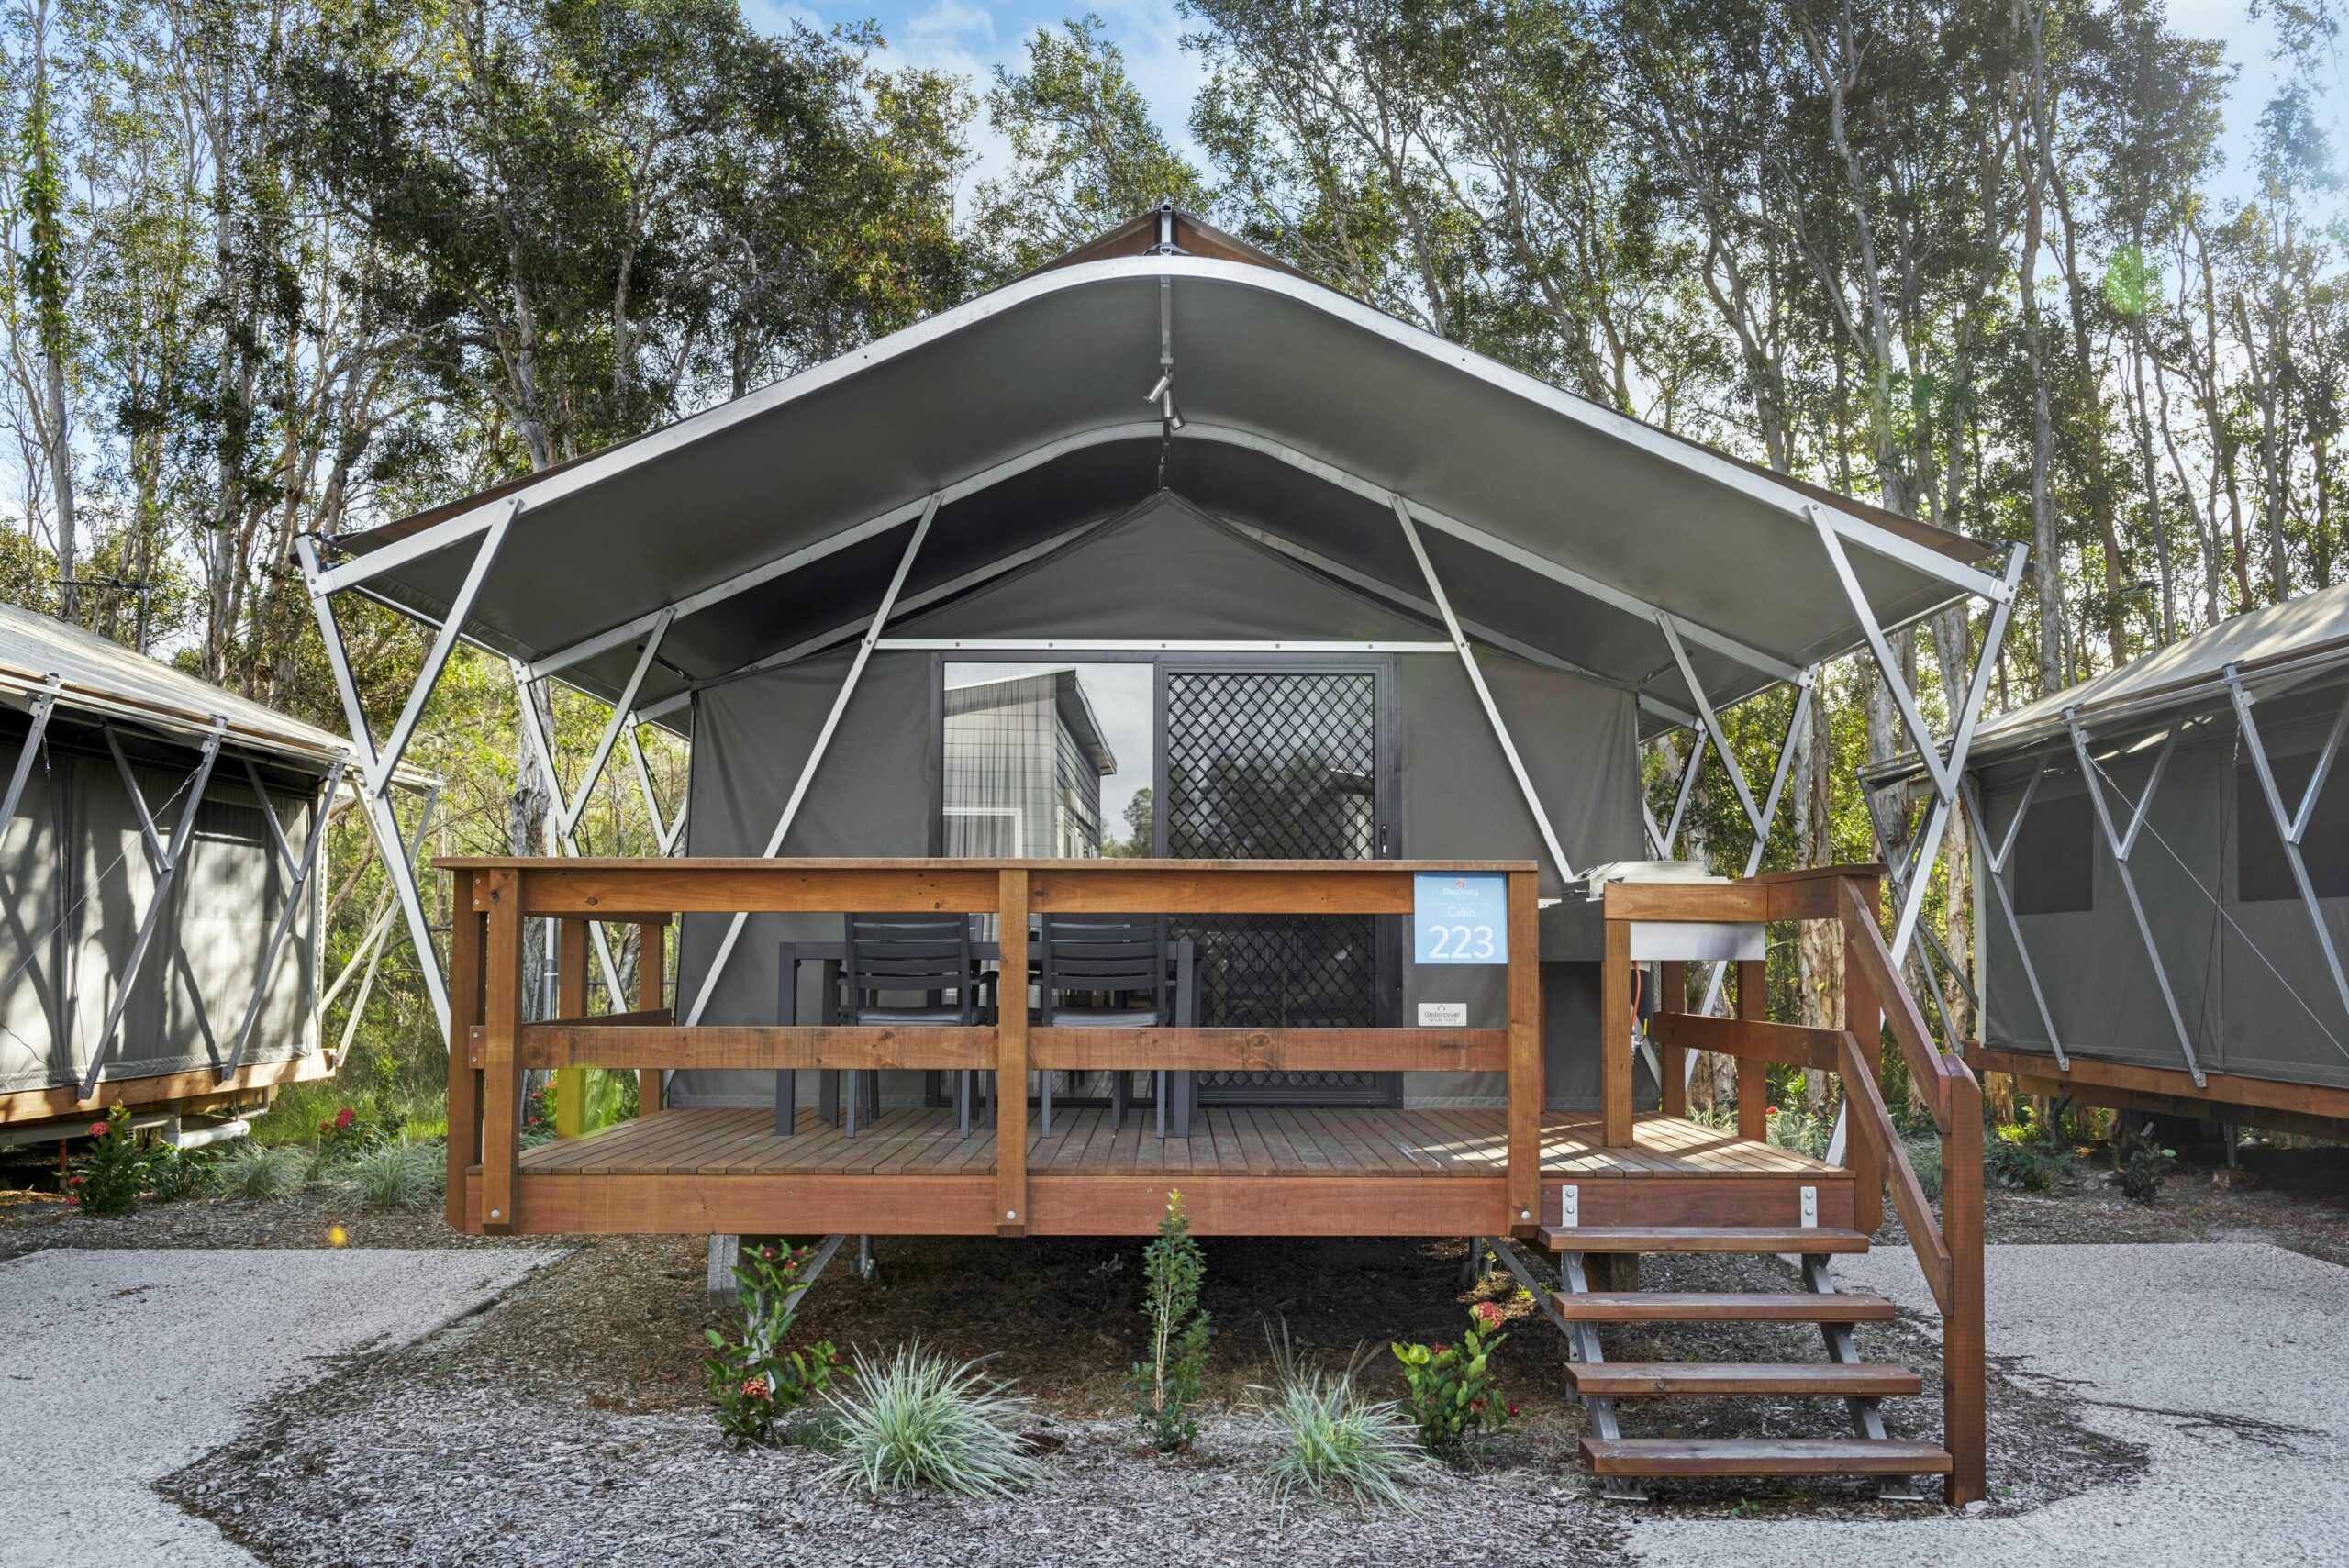 Discovery Parks – Byron Bay